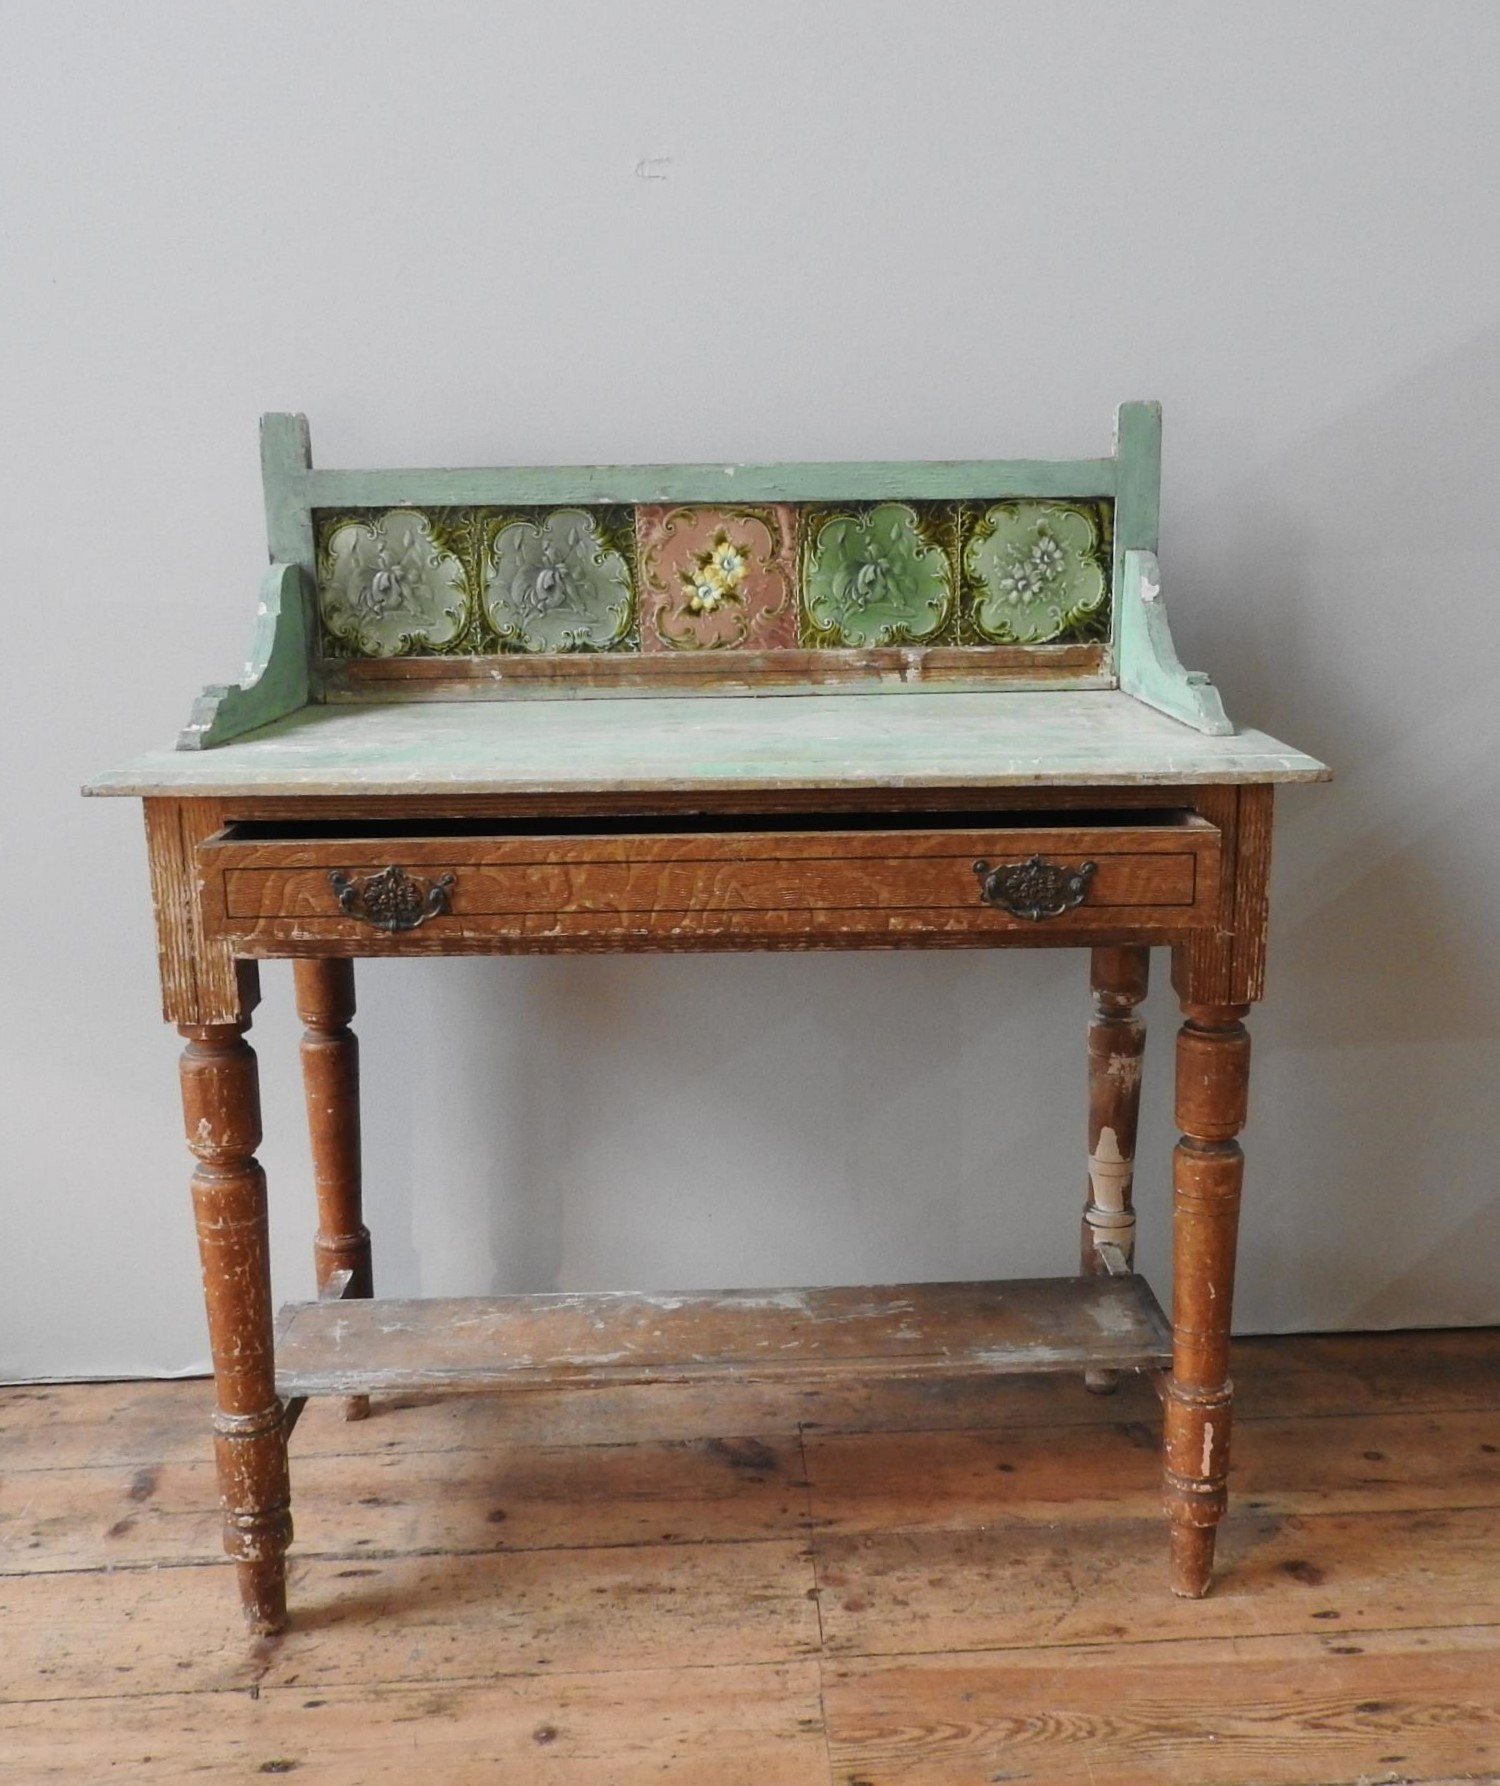 A 19th CENTURY PINE GRAIN PAINTED TILE BACK WASH STAND, 100 x 91 x 46 cm - Image 5 of 6